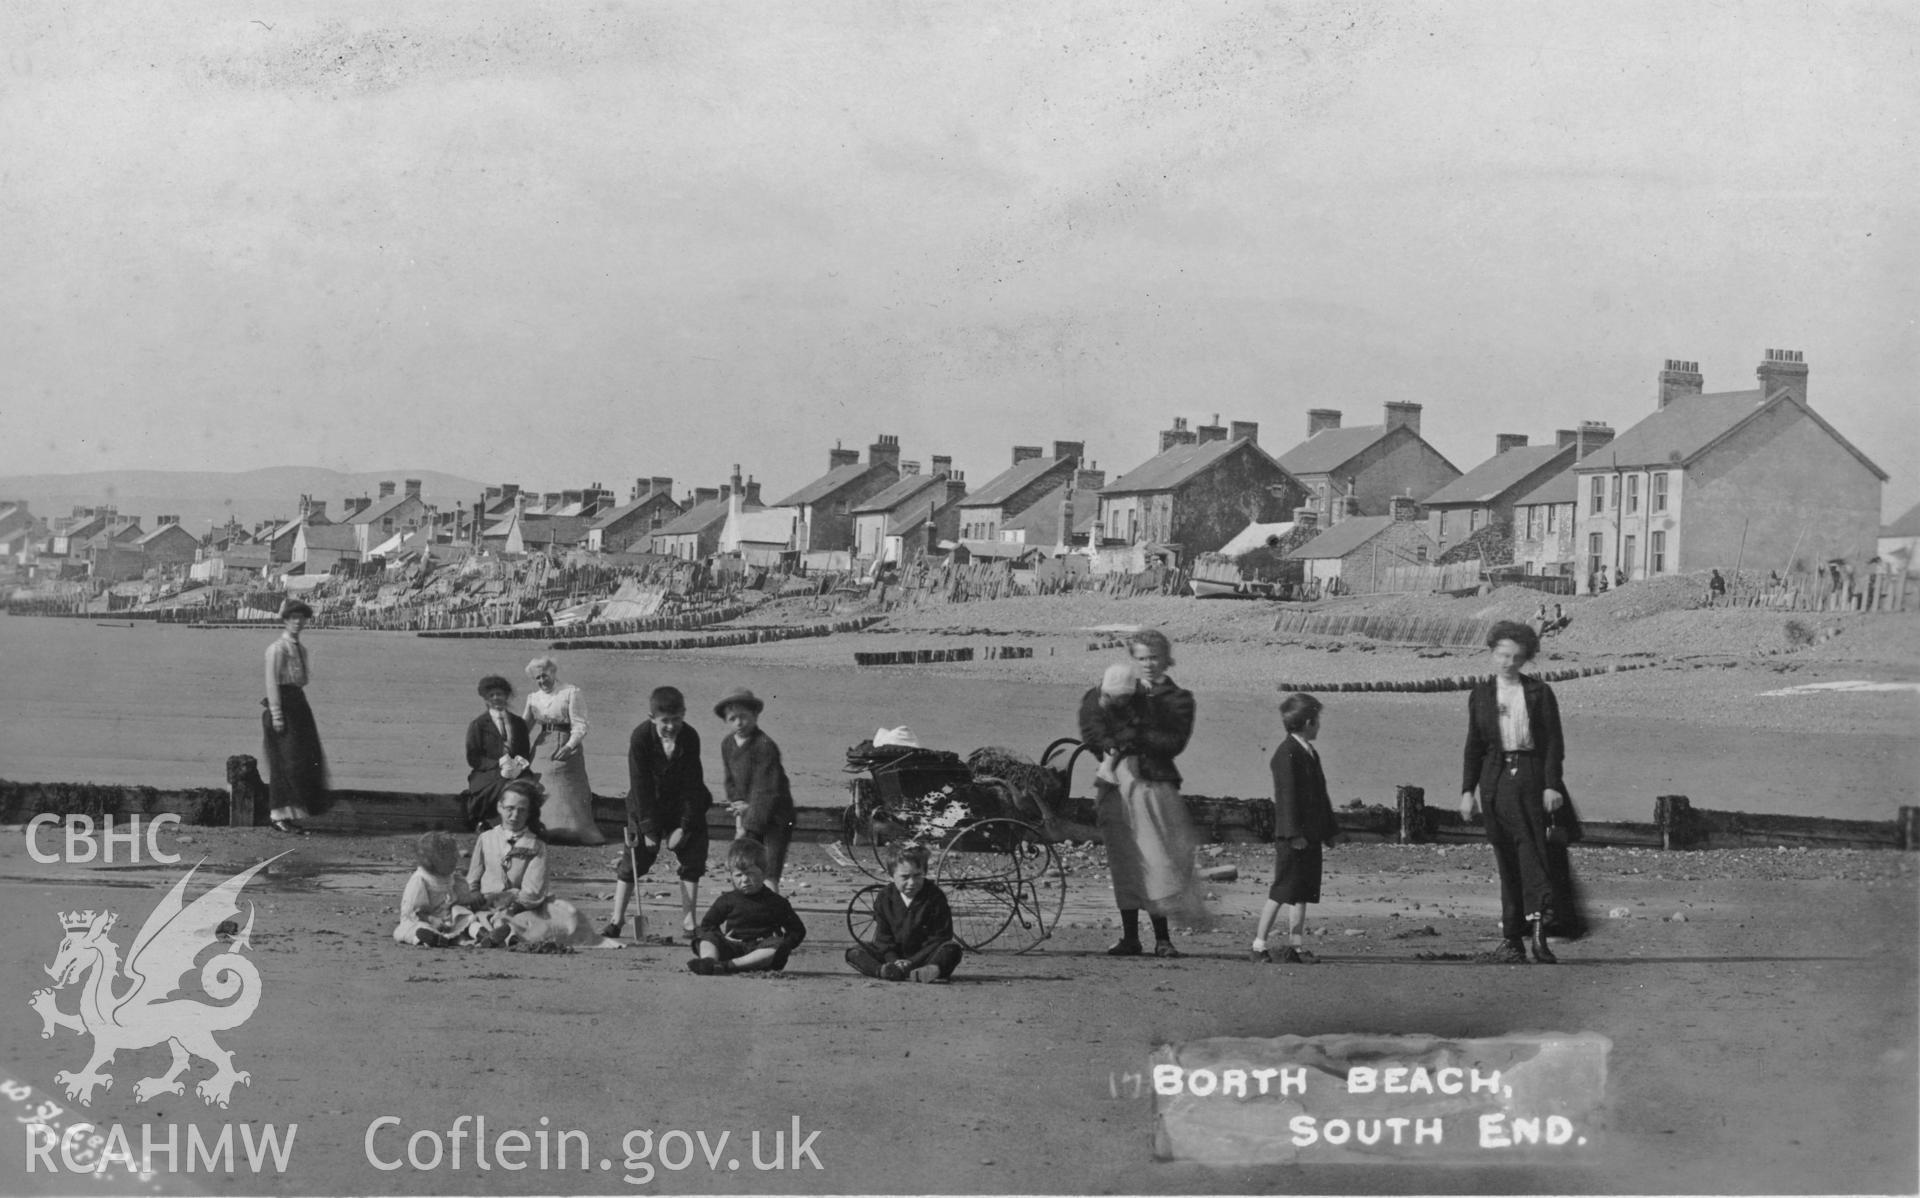 Digital copy of postcard showing Borth Beach, South End, dated 1915 (Publisher: W. J. Lewis, Borth).  Loaned for copying by Charlie Downes.